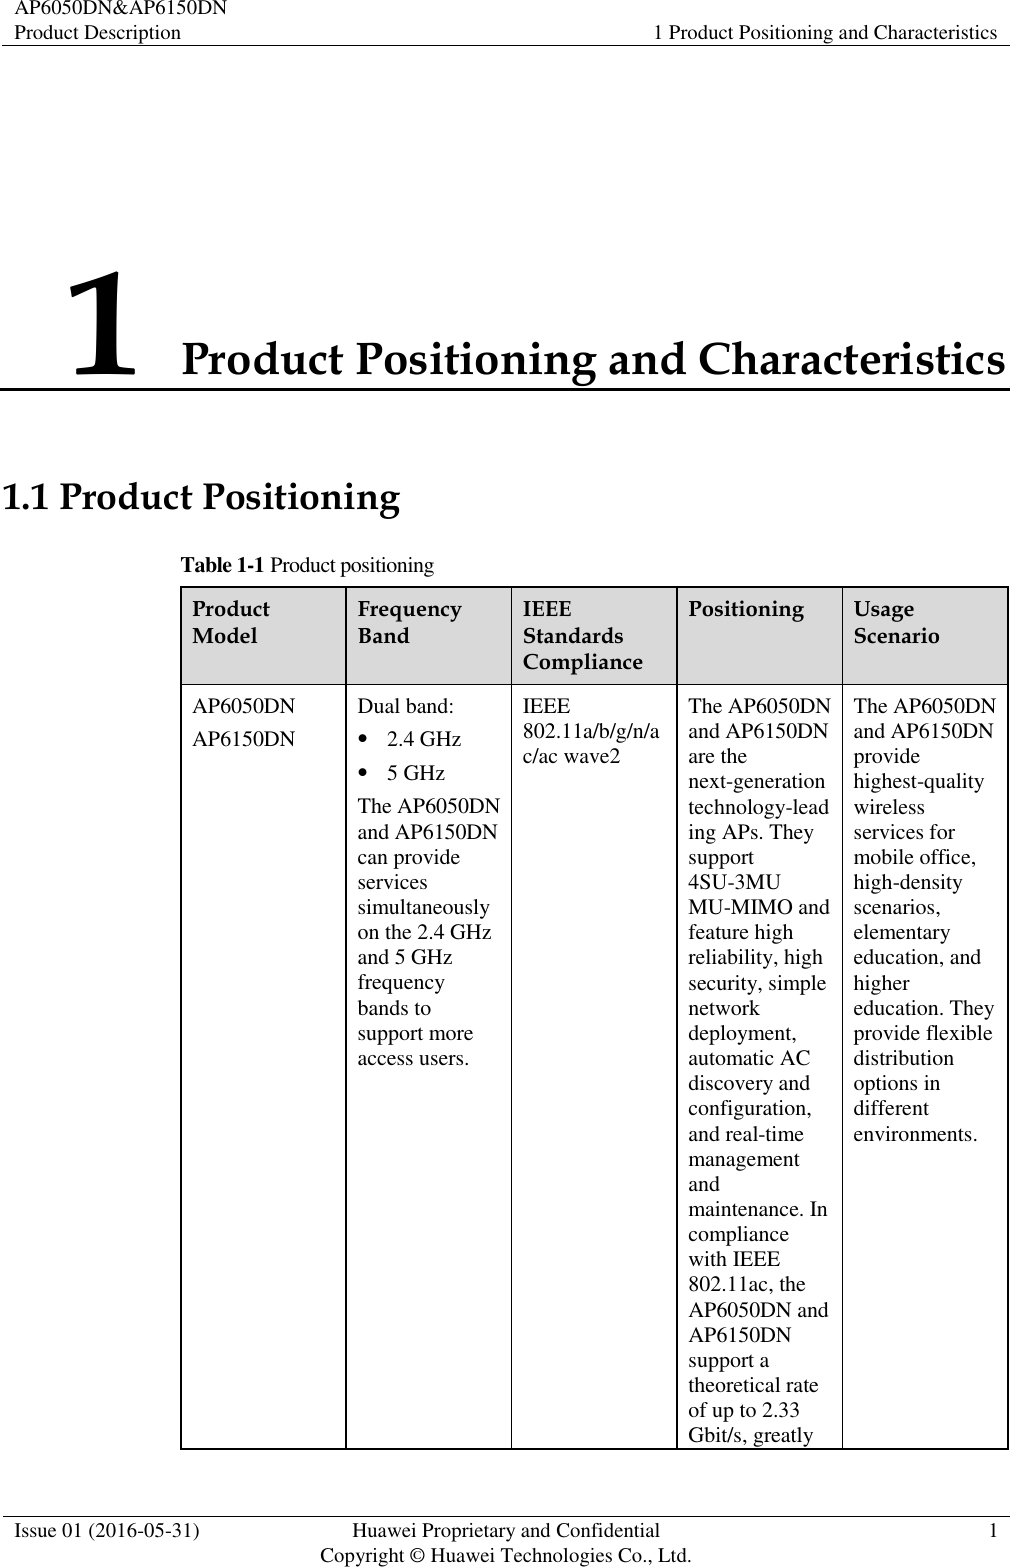 AP6050DN&amp;AP6150DN Product Description 1 Product Positioning and Characteristics  Issue 01 (2016-05-31) Huawei Proprietary and Confidential                                     Copyright © Huawei Technologies Co., Ltd. 1  1 Product Positioning and Characteristics 1.1 Product Positioning Table 1-1 Product positioning Product Model Frequency Band IEEE Standards Compliance Positioning Usage Scenario AP6050DN AP6150DN Dual band:  2.4 GHz  5 GHz The AP6050DN and AP6150DN can provide services simultaneously on the 2.4 GHz and 5 GHz frequency bands to support more access users. IEEE 802.11a/b/g/n/ac/ac wave2 The AP6050DN and AP6150DN are the next-generation technology-leading APs. They support 4SU-3MU MU-MIMO and feature high reliability, high security, simple network deployment, automatic AC discovery and configuration, and real-time management and maintenance. In compliance with IEEE 802.11ac, the AP6050DN and AP6150DN support a theoretical rate of up to 2.33 Gbit/s, greatly The AP6050DN and AP6150DN provide highest-quality wireless services for mobile office, high-density scenarios, elementary education, and higher education. They provide flexible distribution options in different environments. 